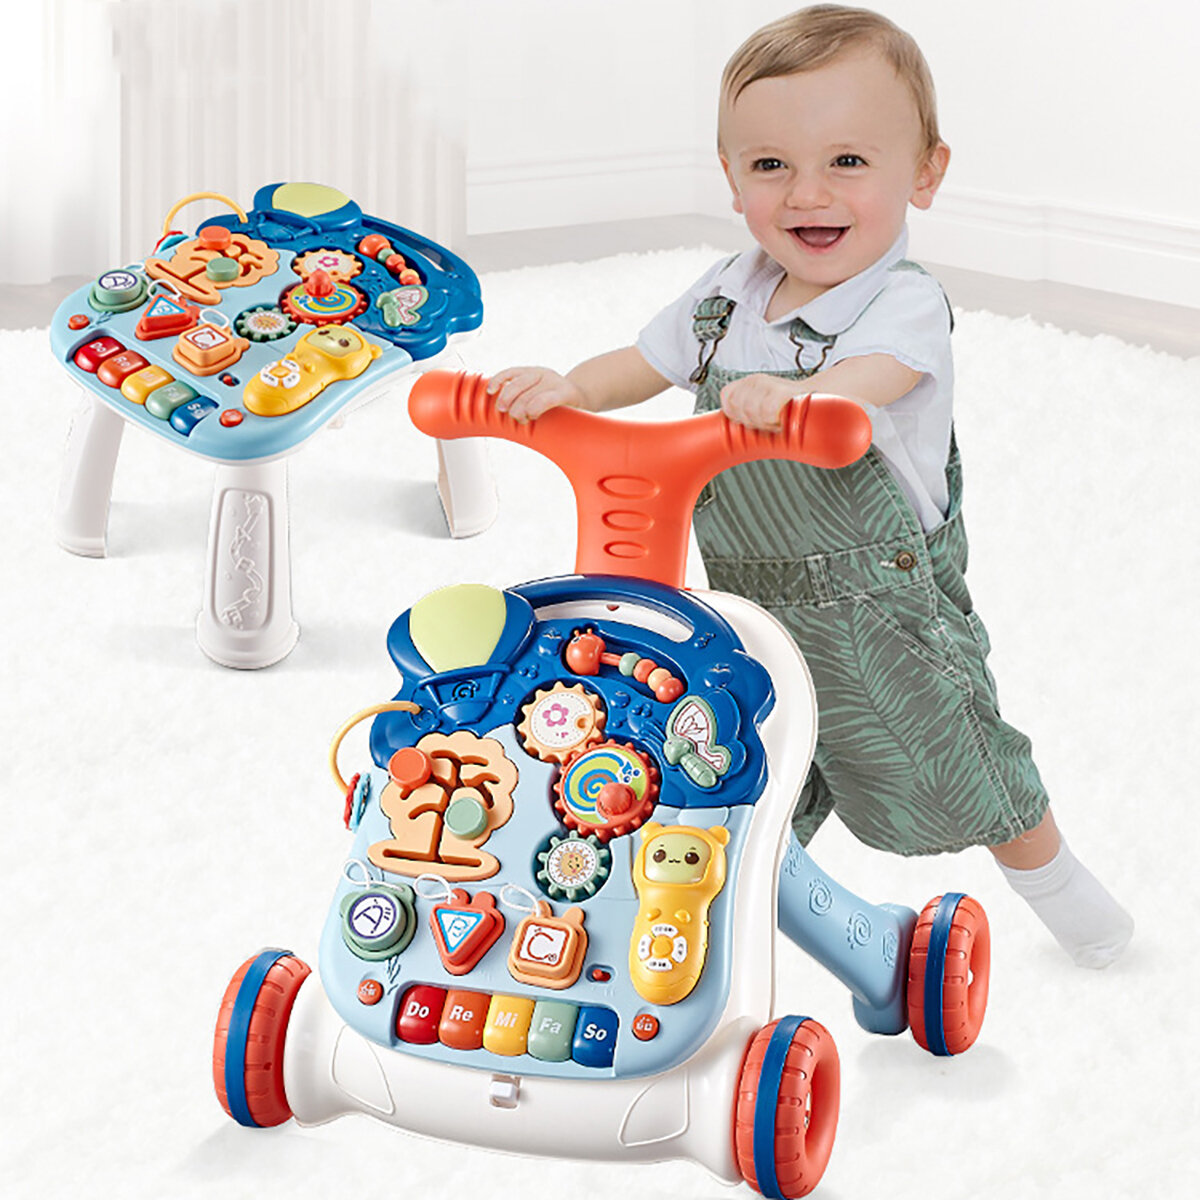 Image of 2-in-1 Baby Sit-to-Stand Activity Toy For Toddler Kids Walking Learning Safe Walkers